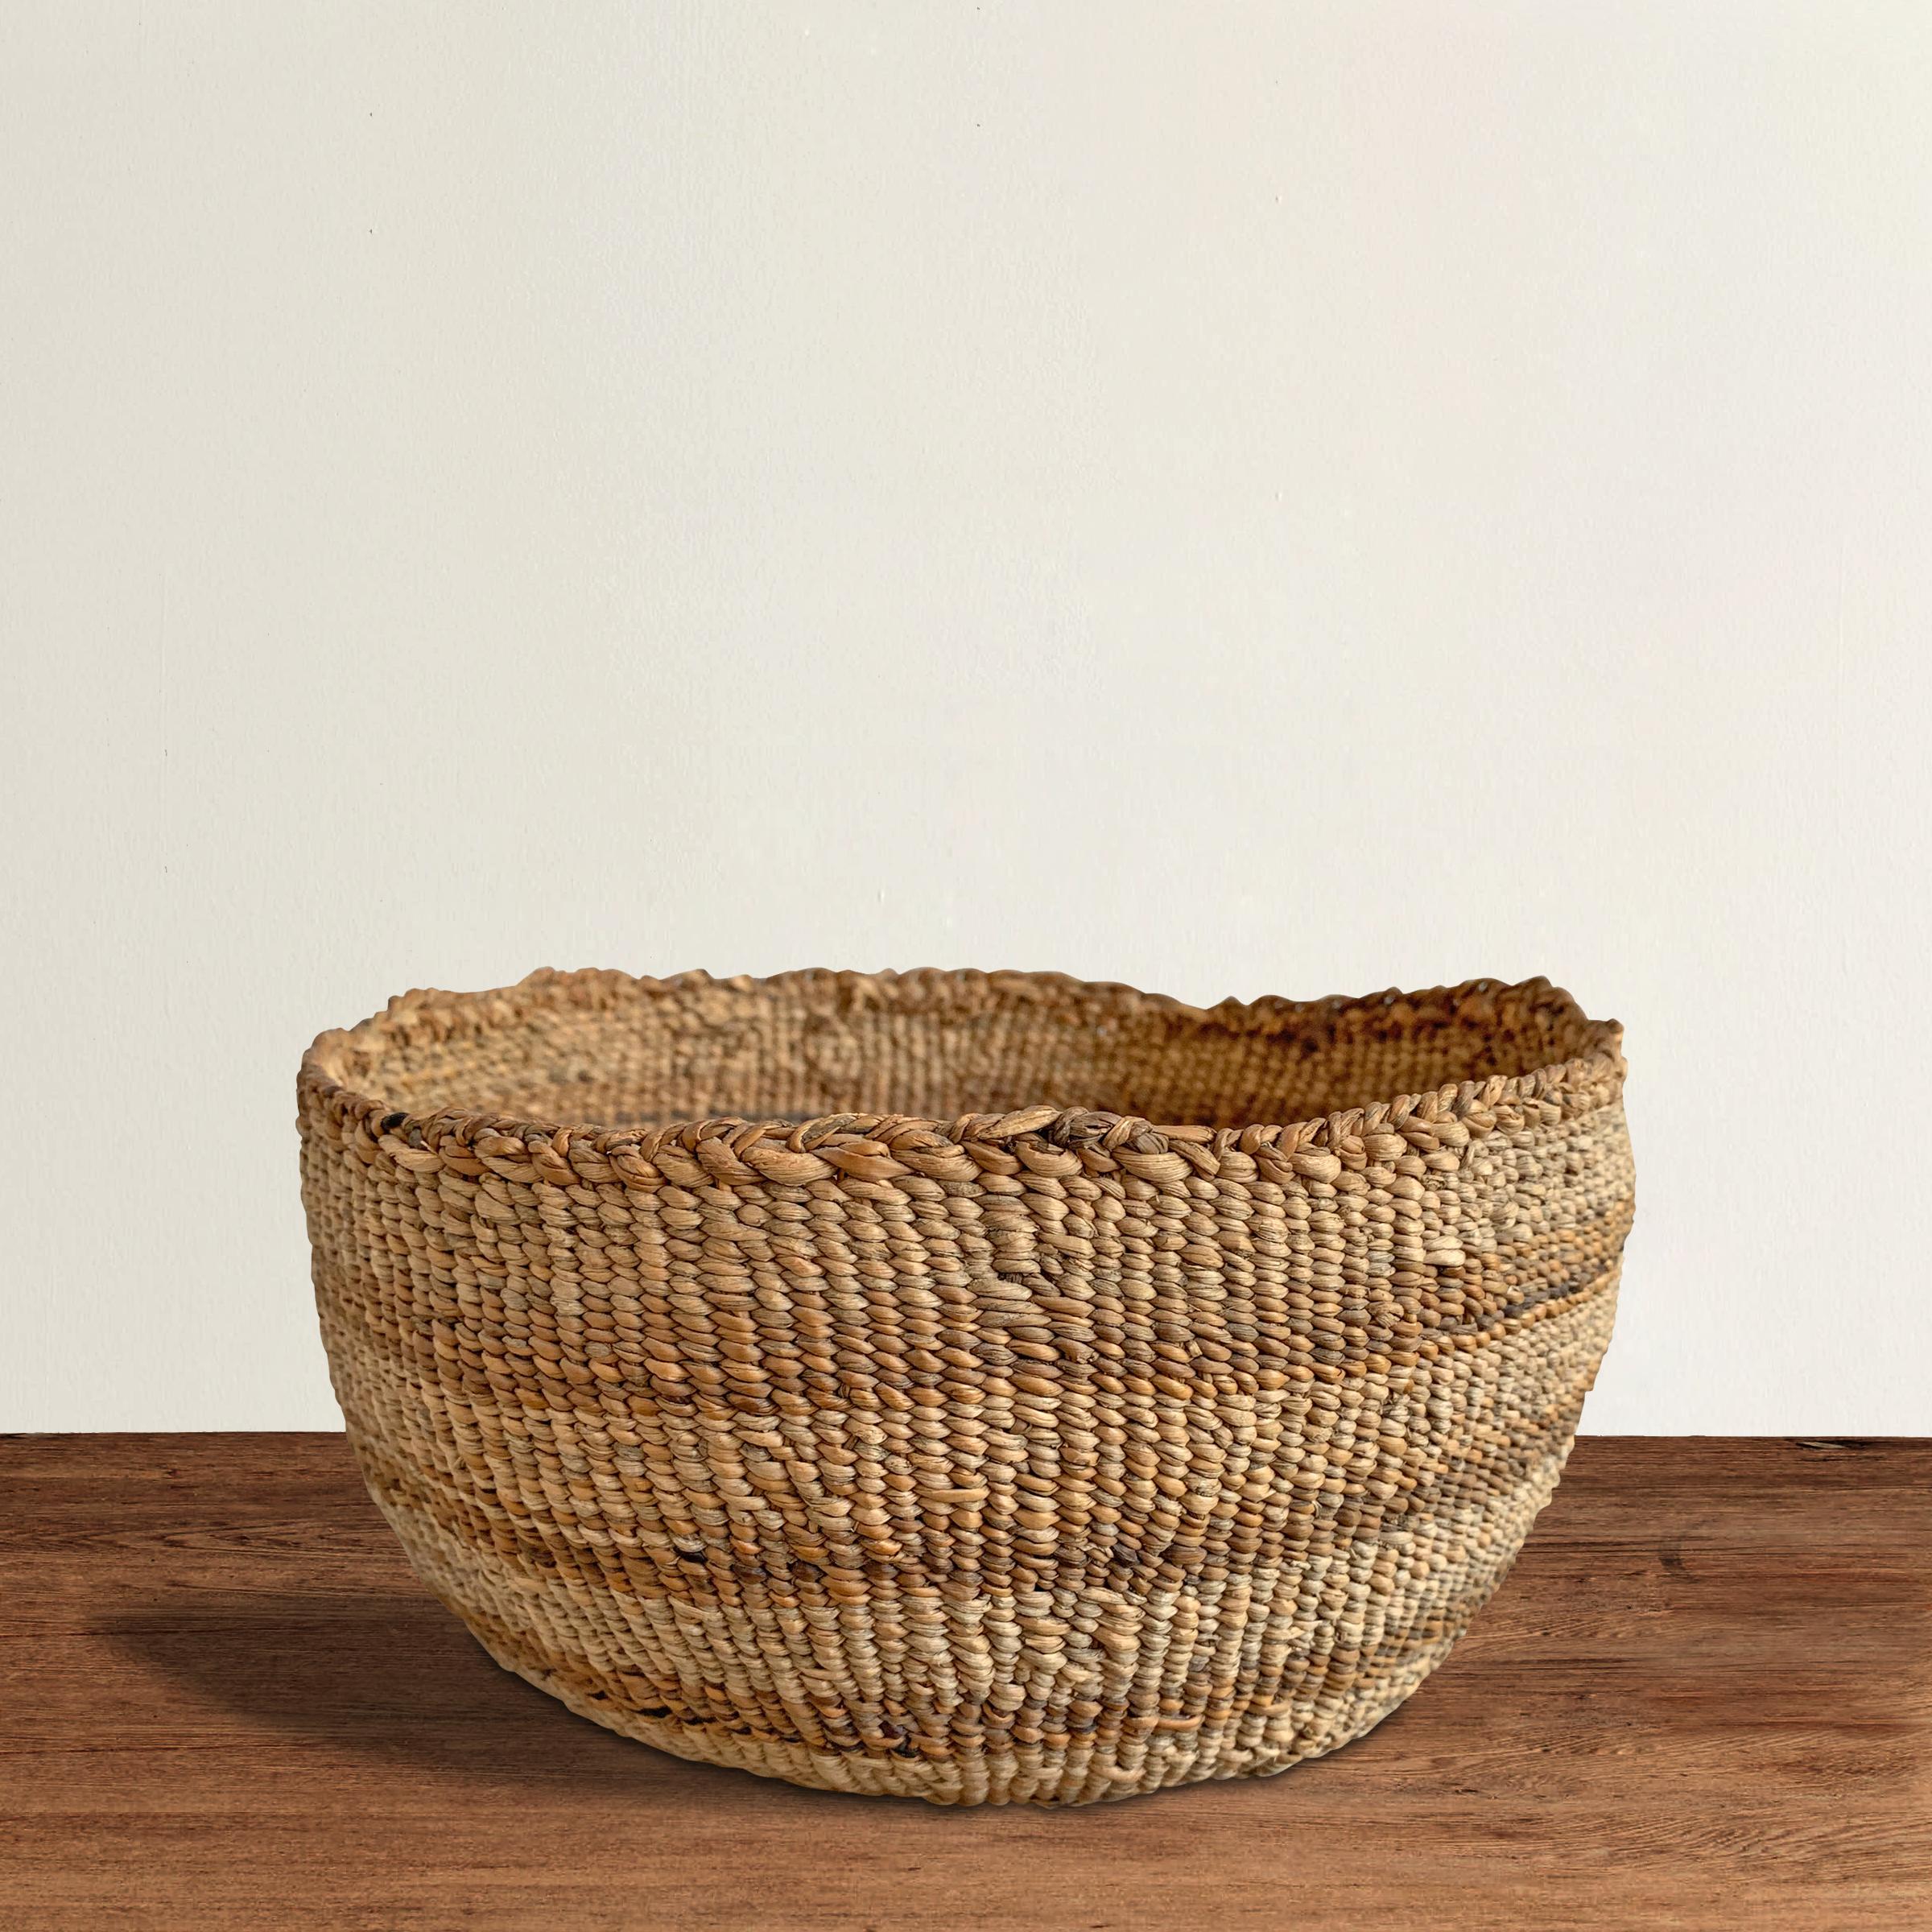 A wonderful and charming early 20th century Pacific NW Native American handwoven basket with a decorative linear pattern using varying shads of natural grasses.